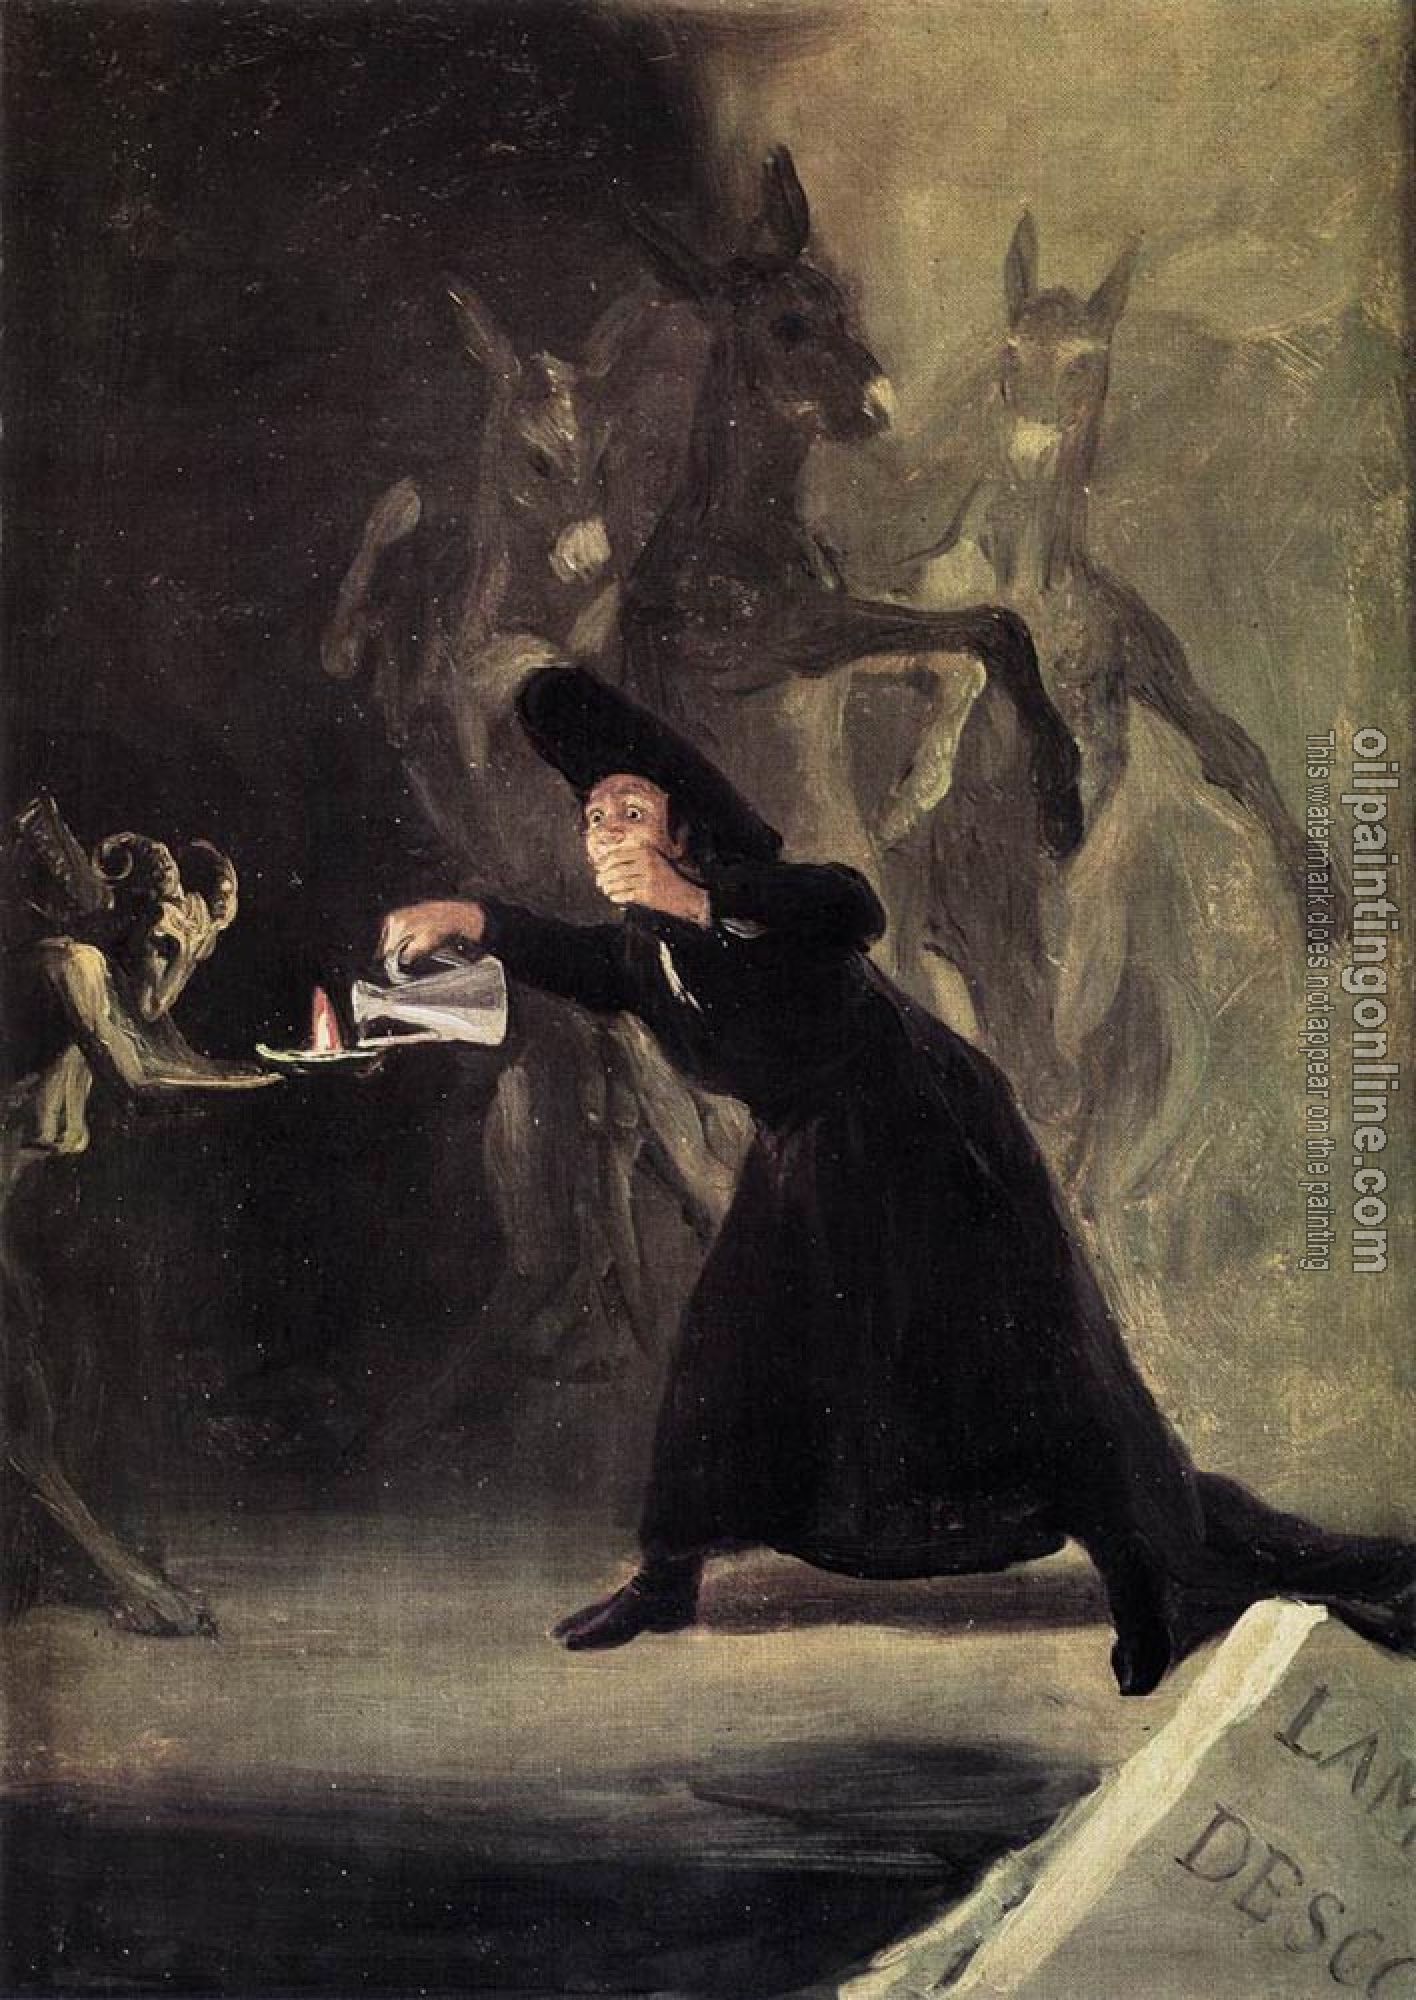 Goya, Francisco de - The Bewitched Man